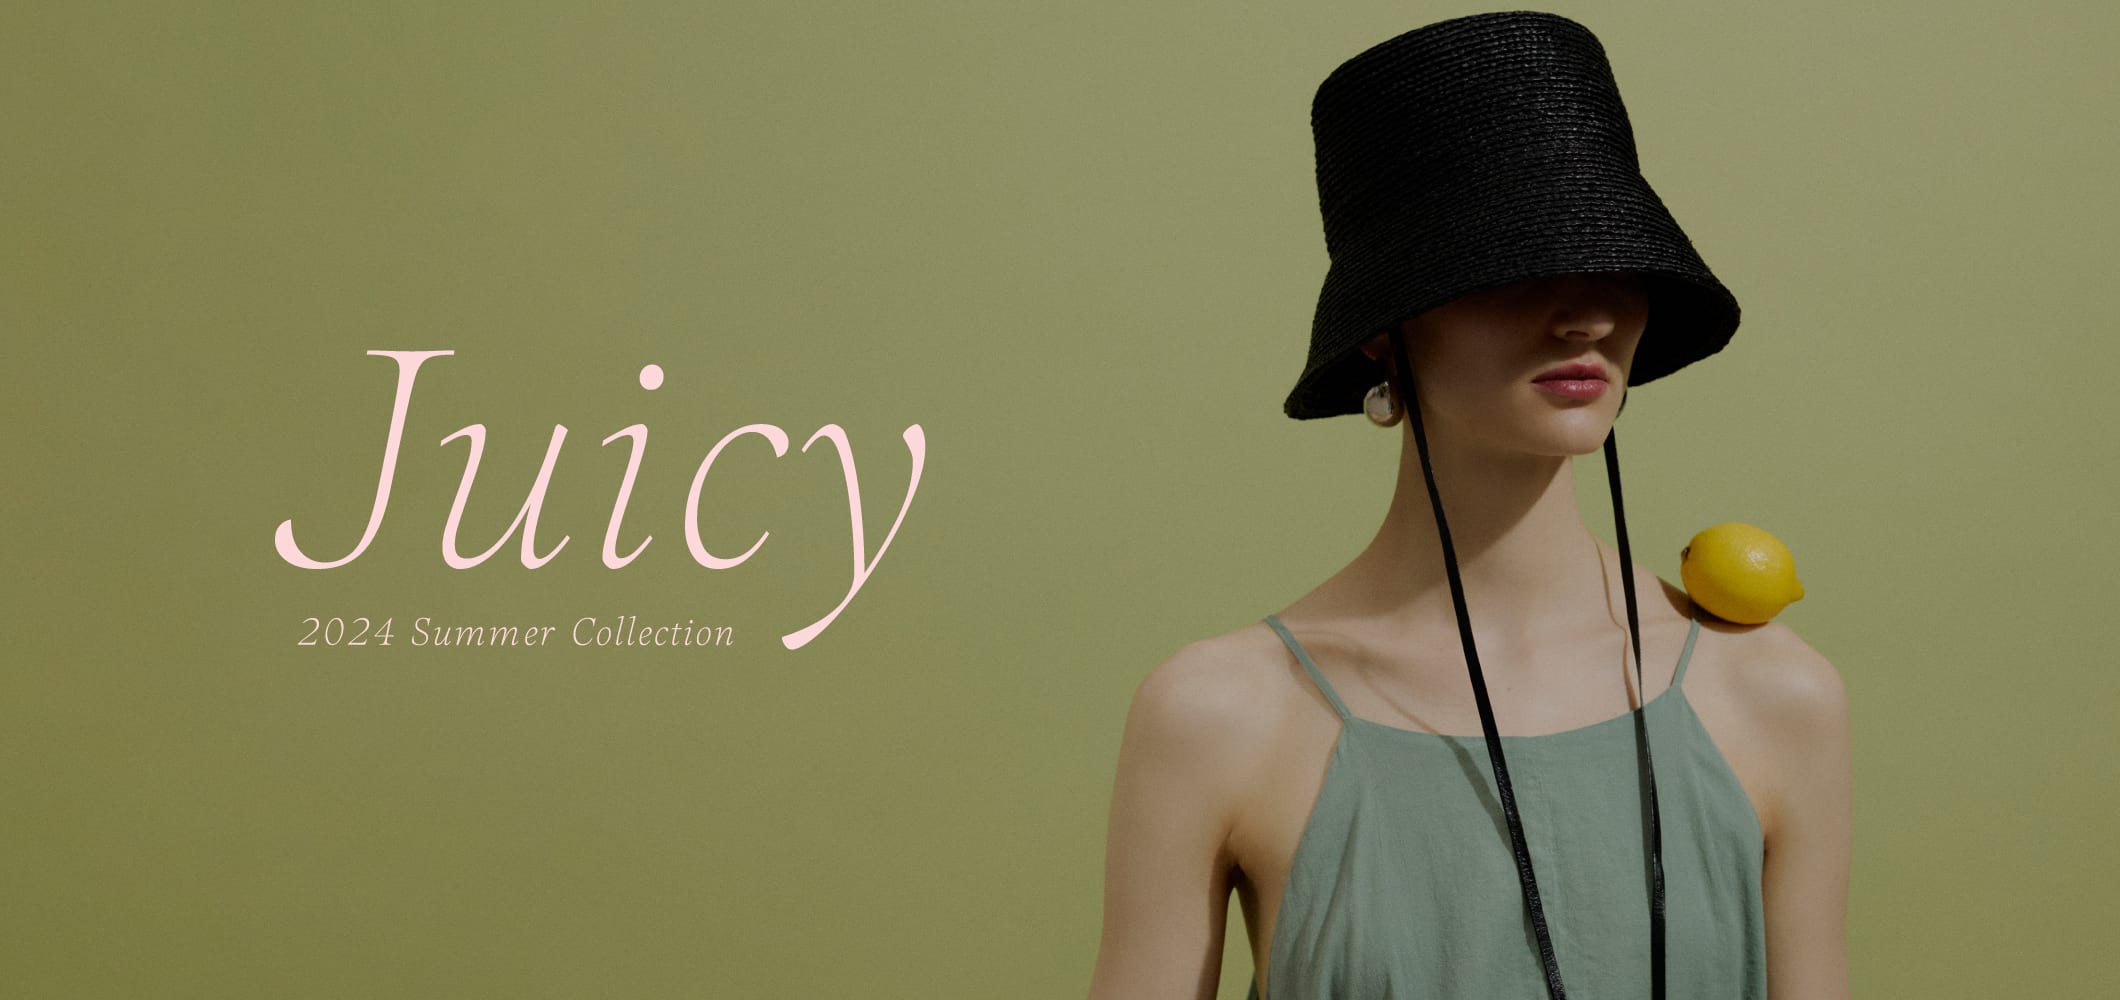 【Juicy】2024 Summer Collection